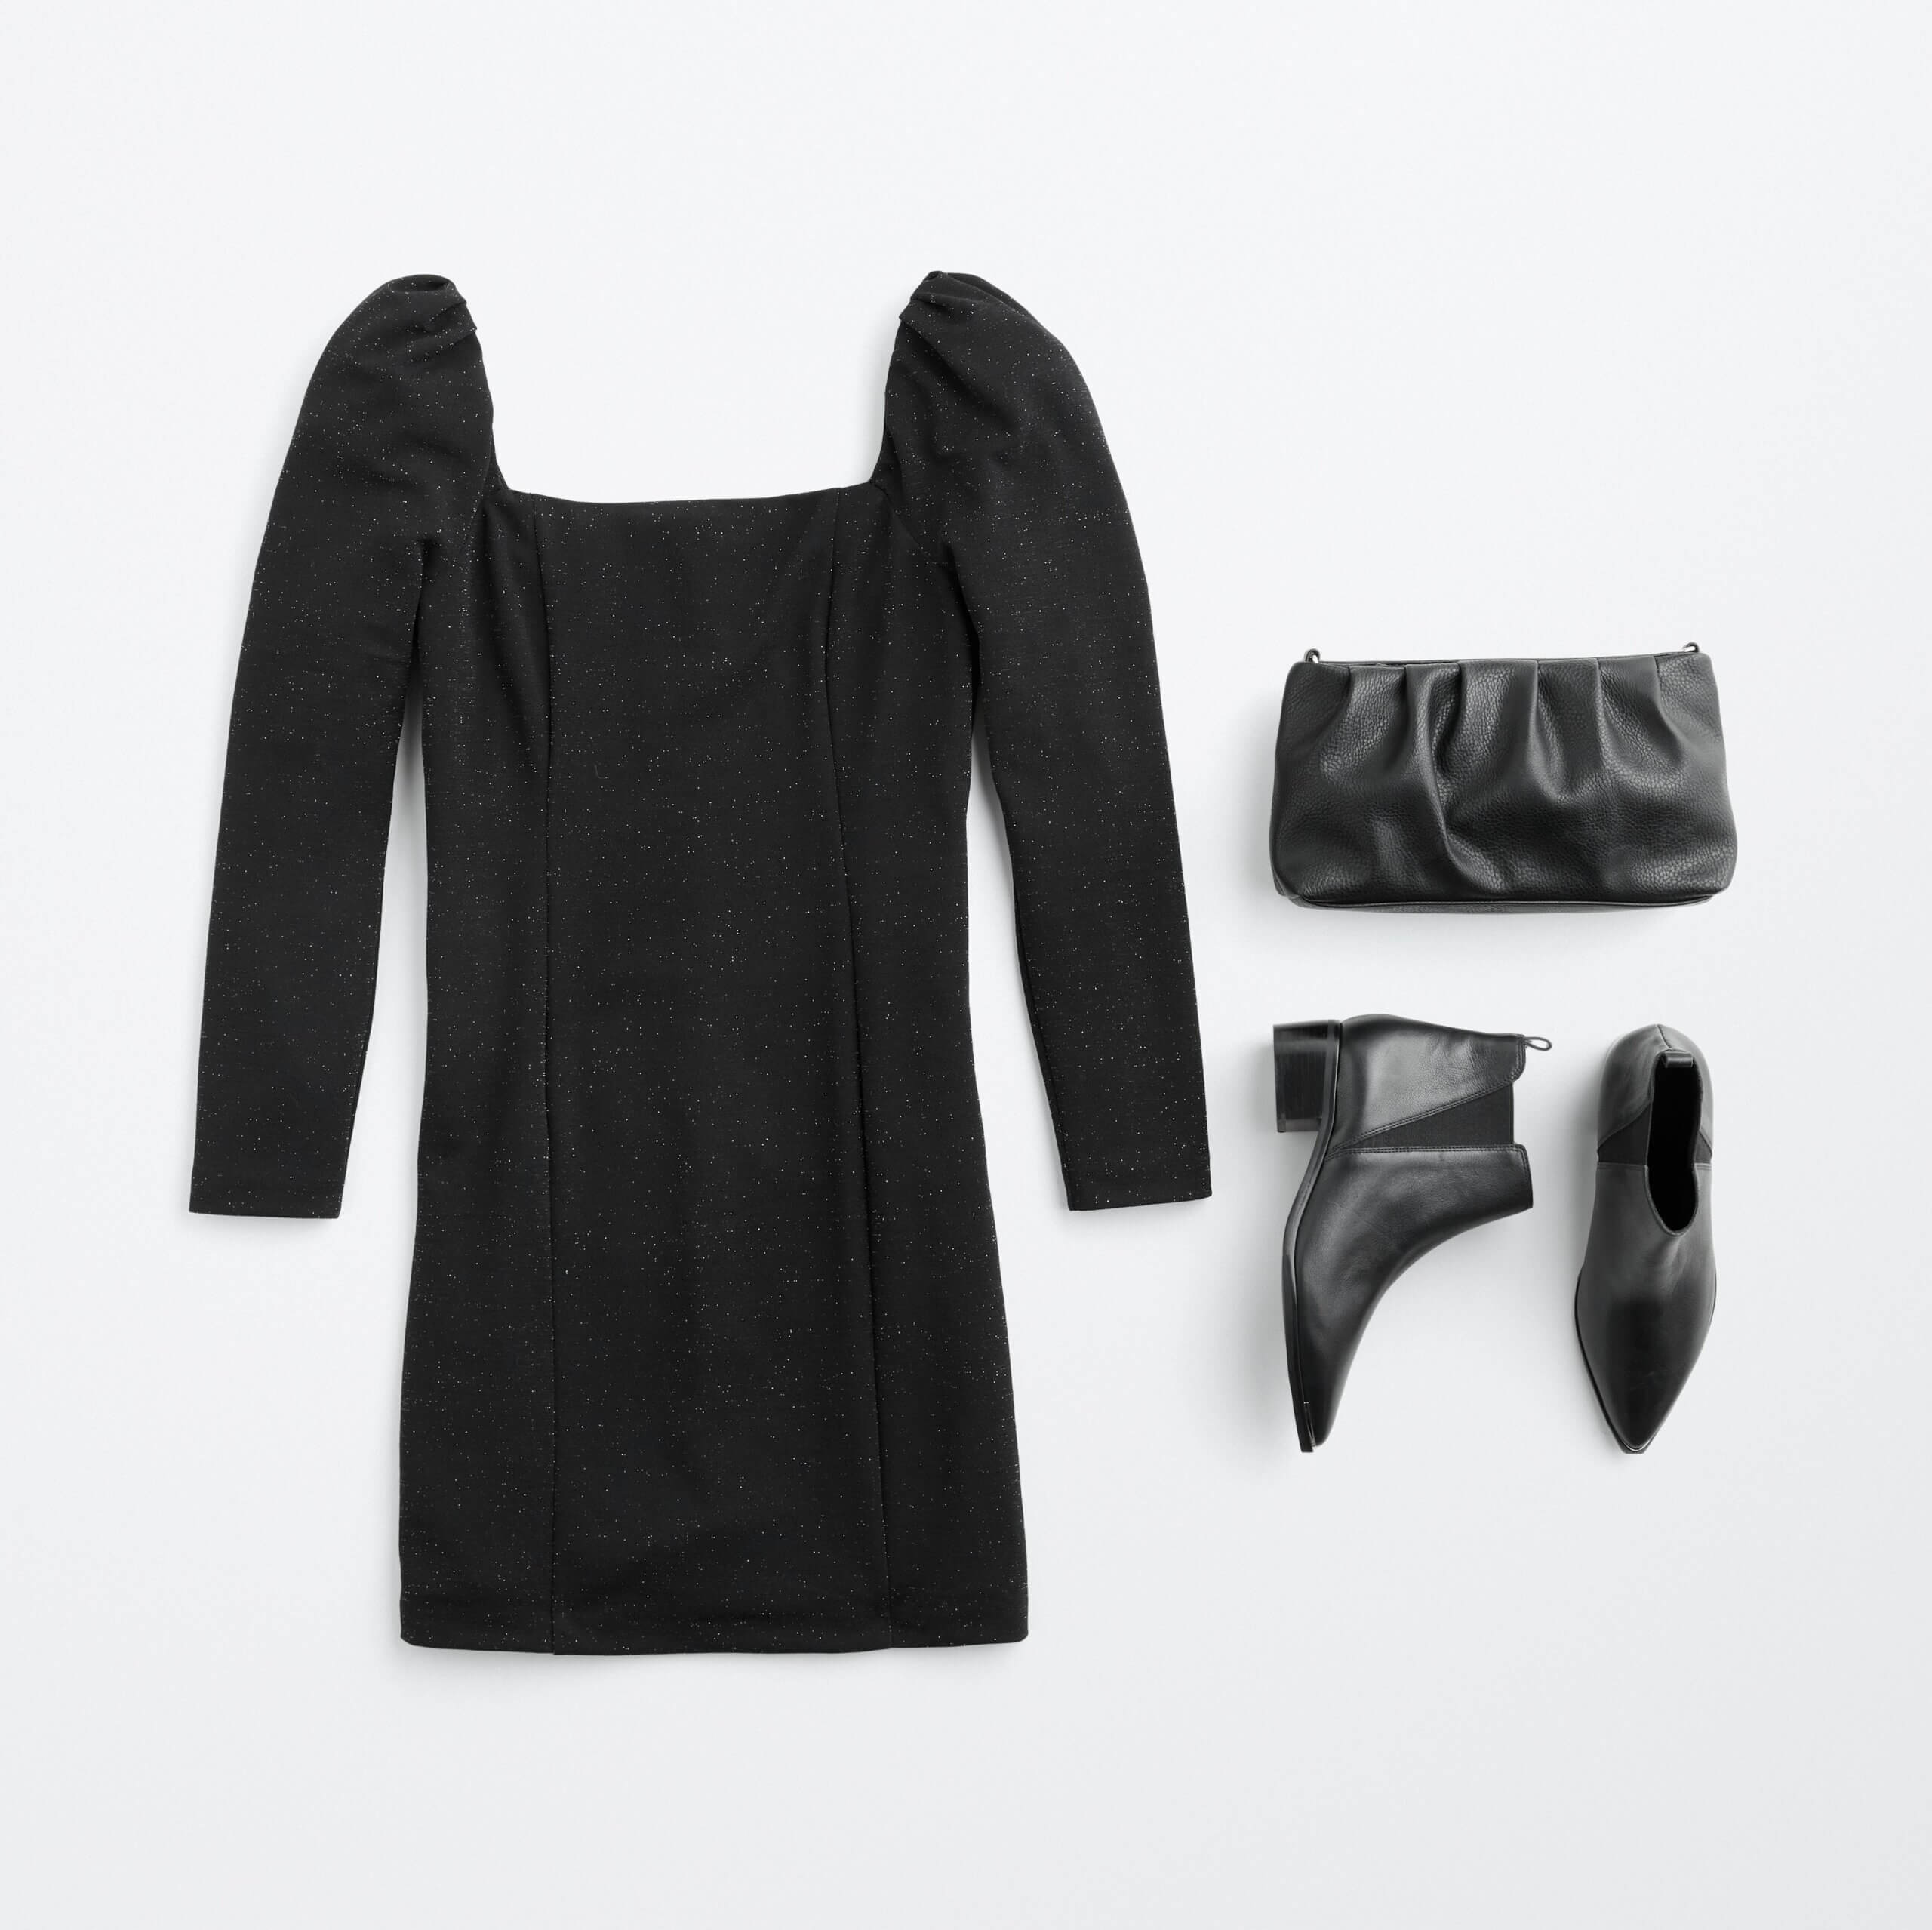 Stitch Fix women's petite with large bust outfit featuring black square-neck long-sleeve fitted dress, black clutch and booties.